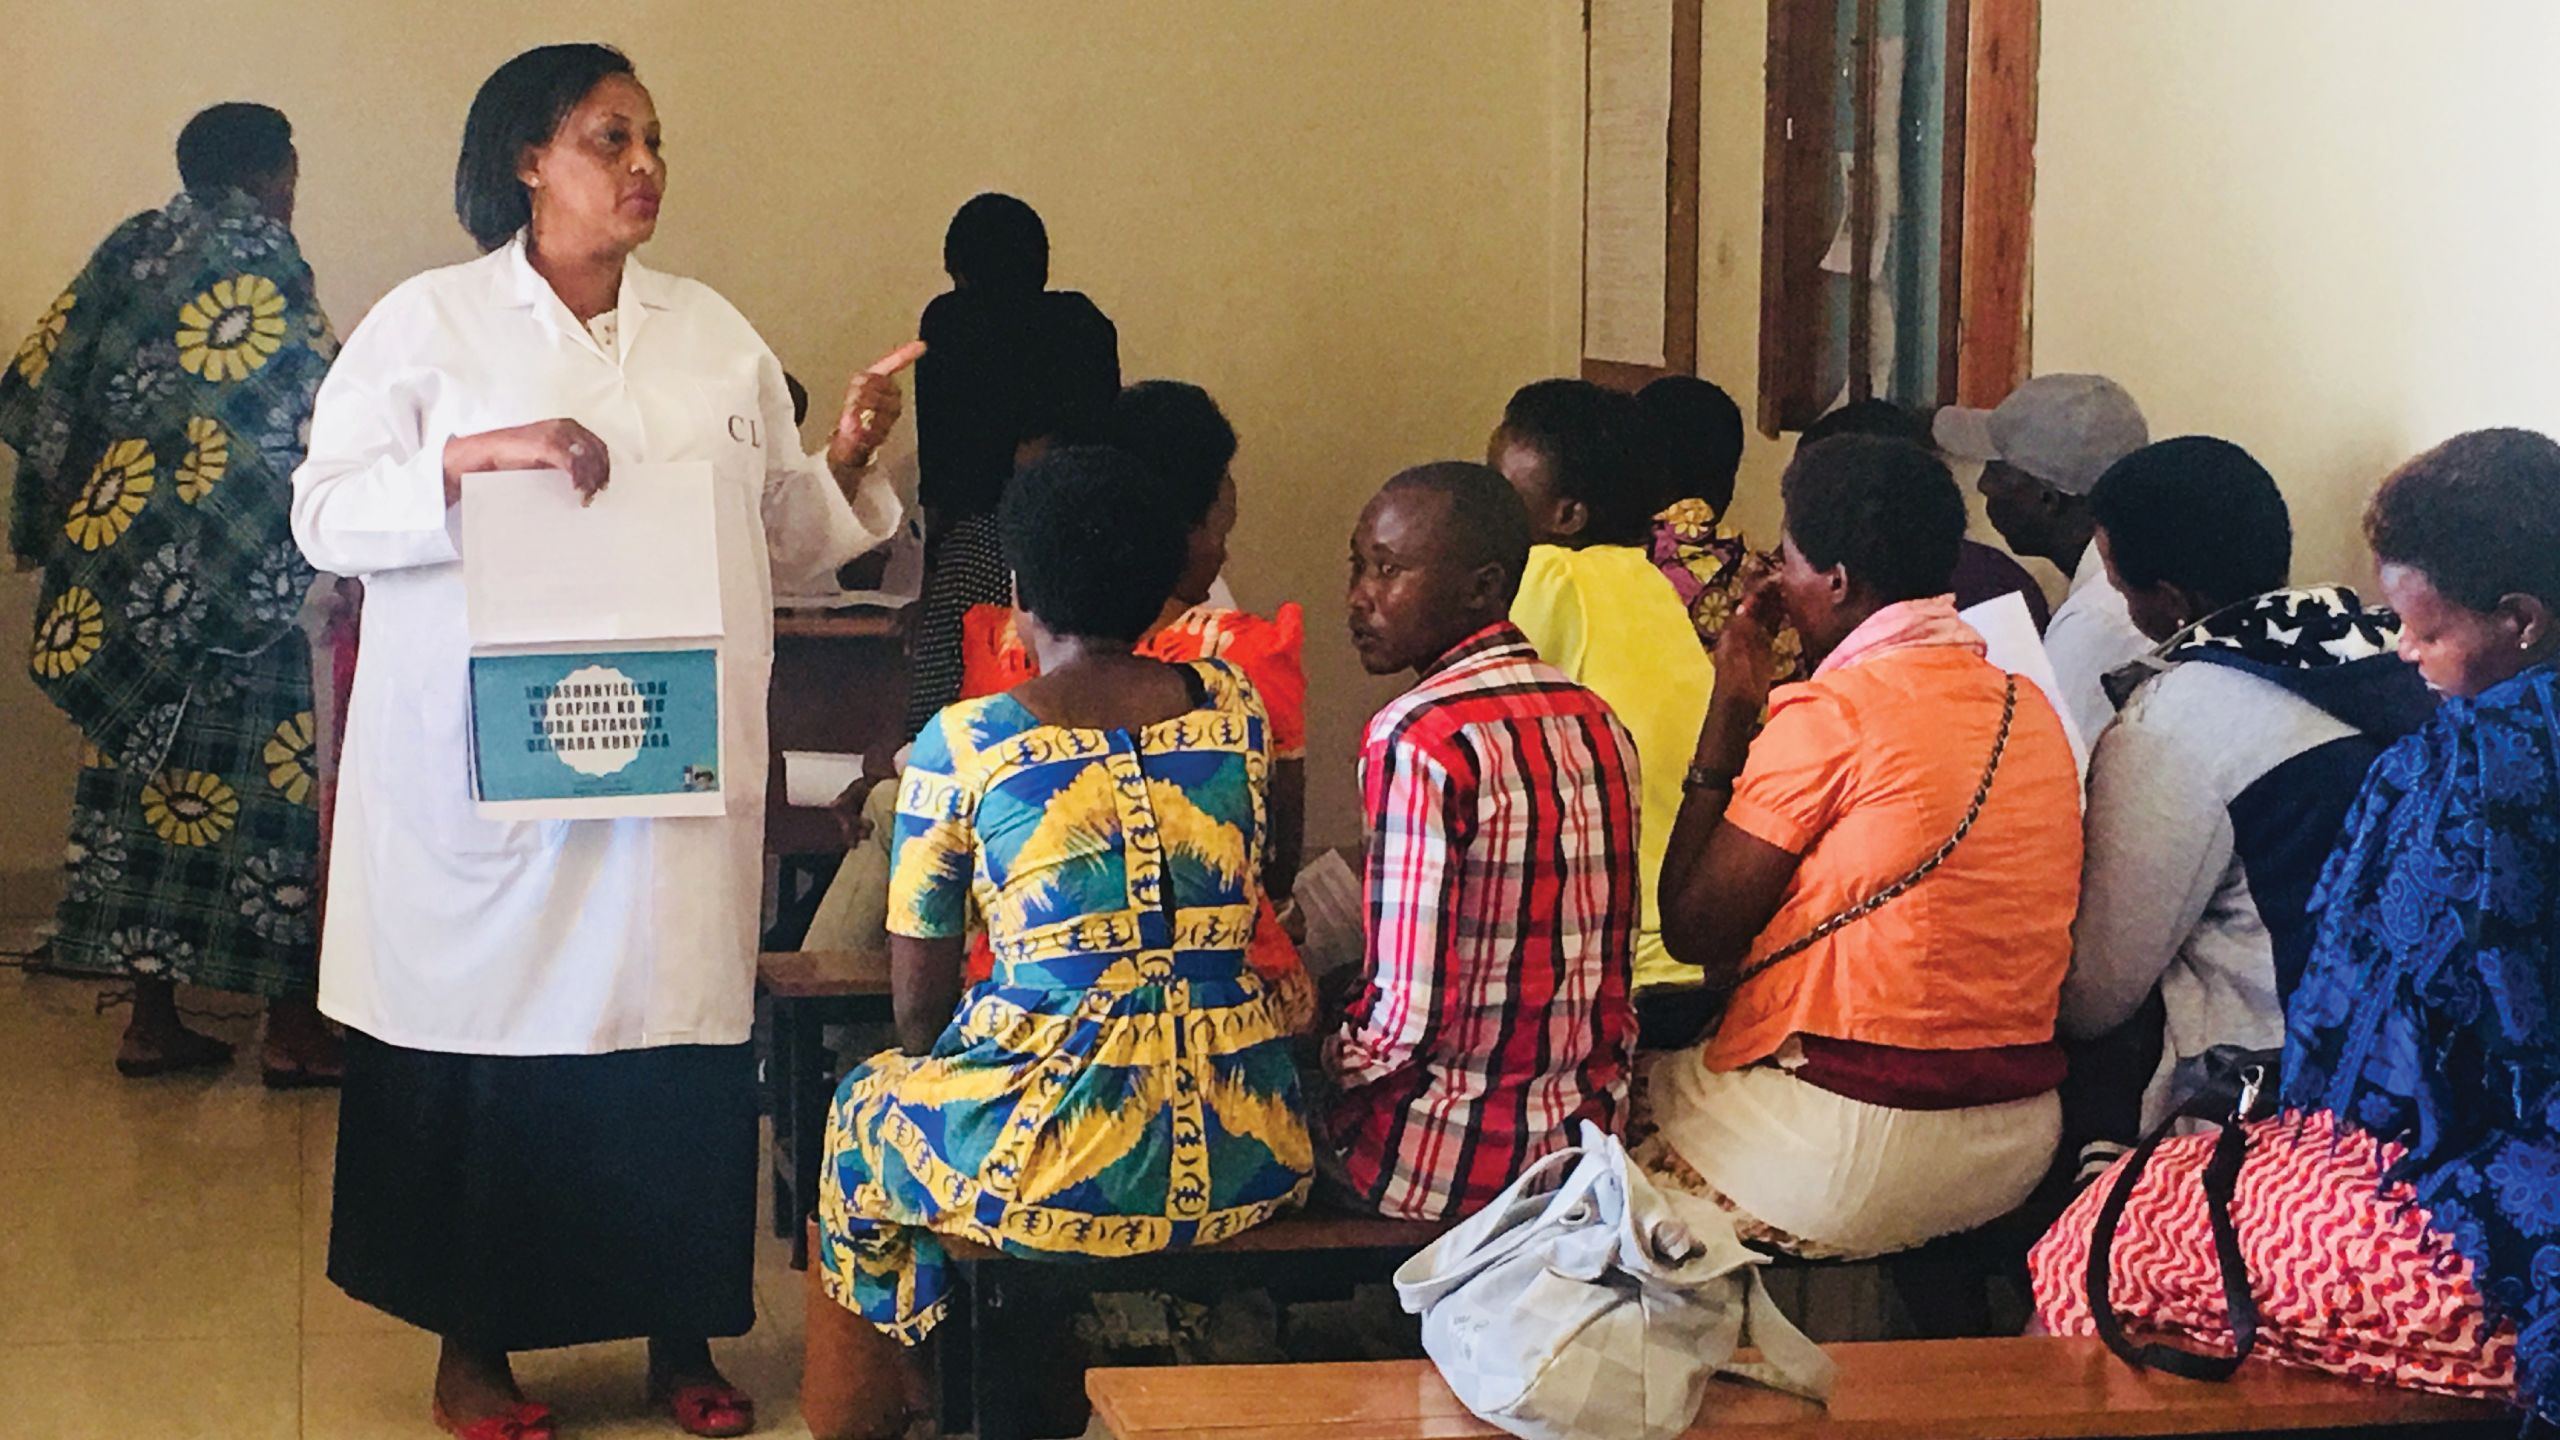 Medical staff in Rwanda educate pregnant women and their partners about the effectiveness of IUDs in family planning as part of an intervention by Kristin Wall, who is not pictured here.